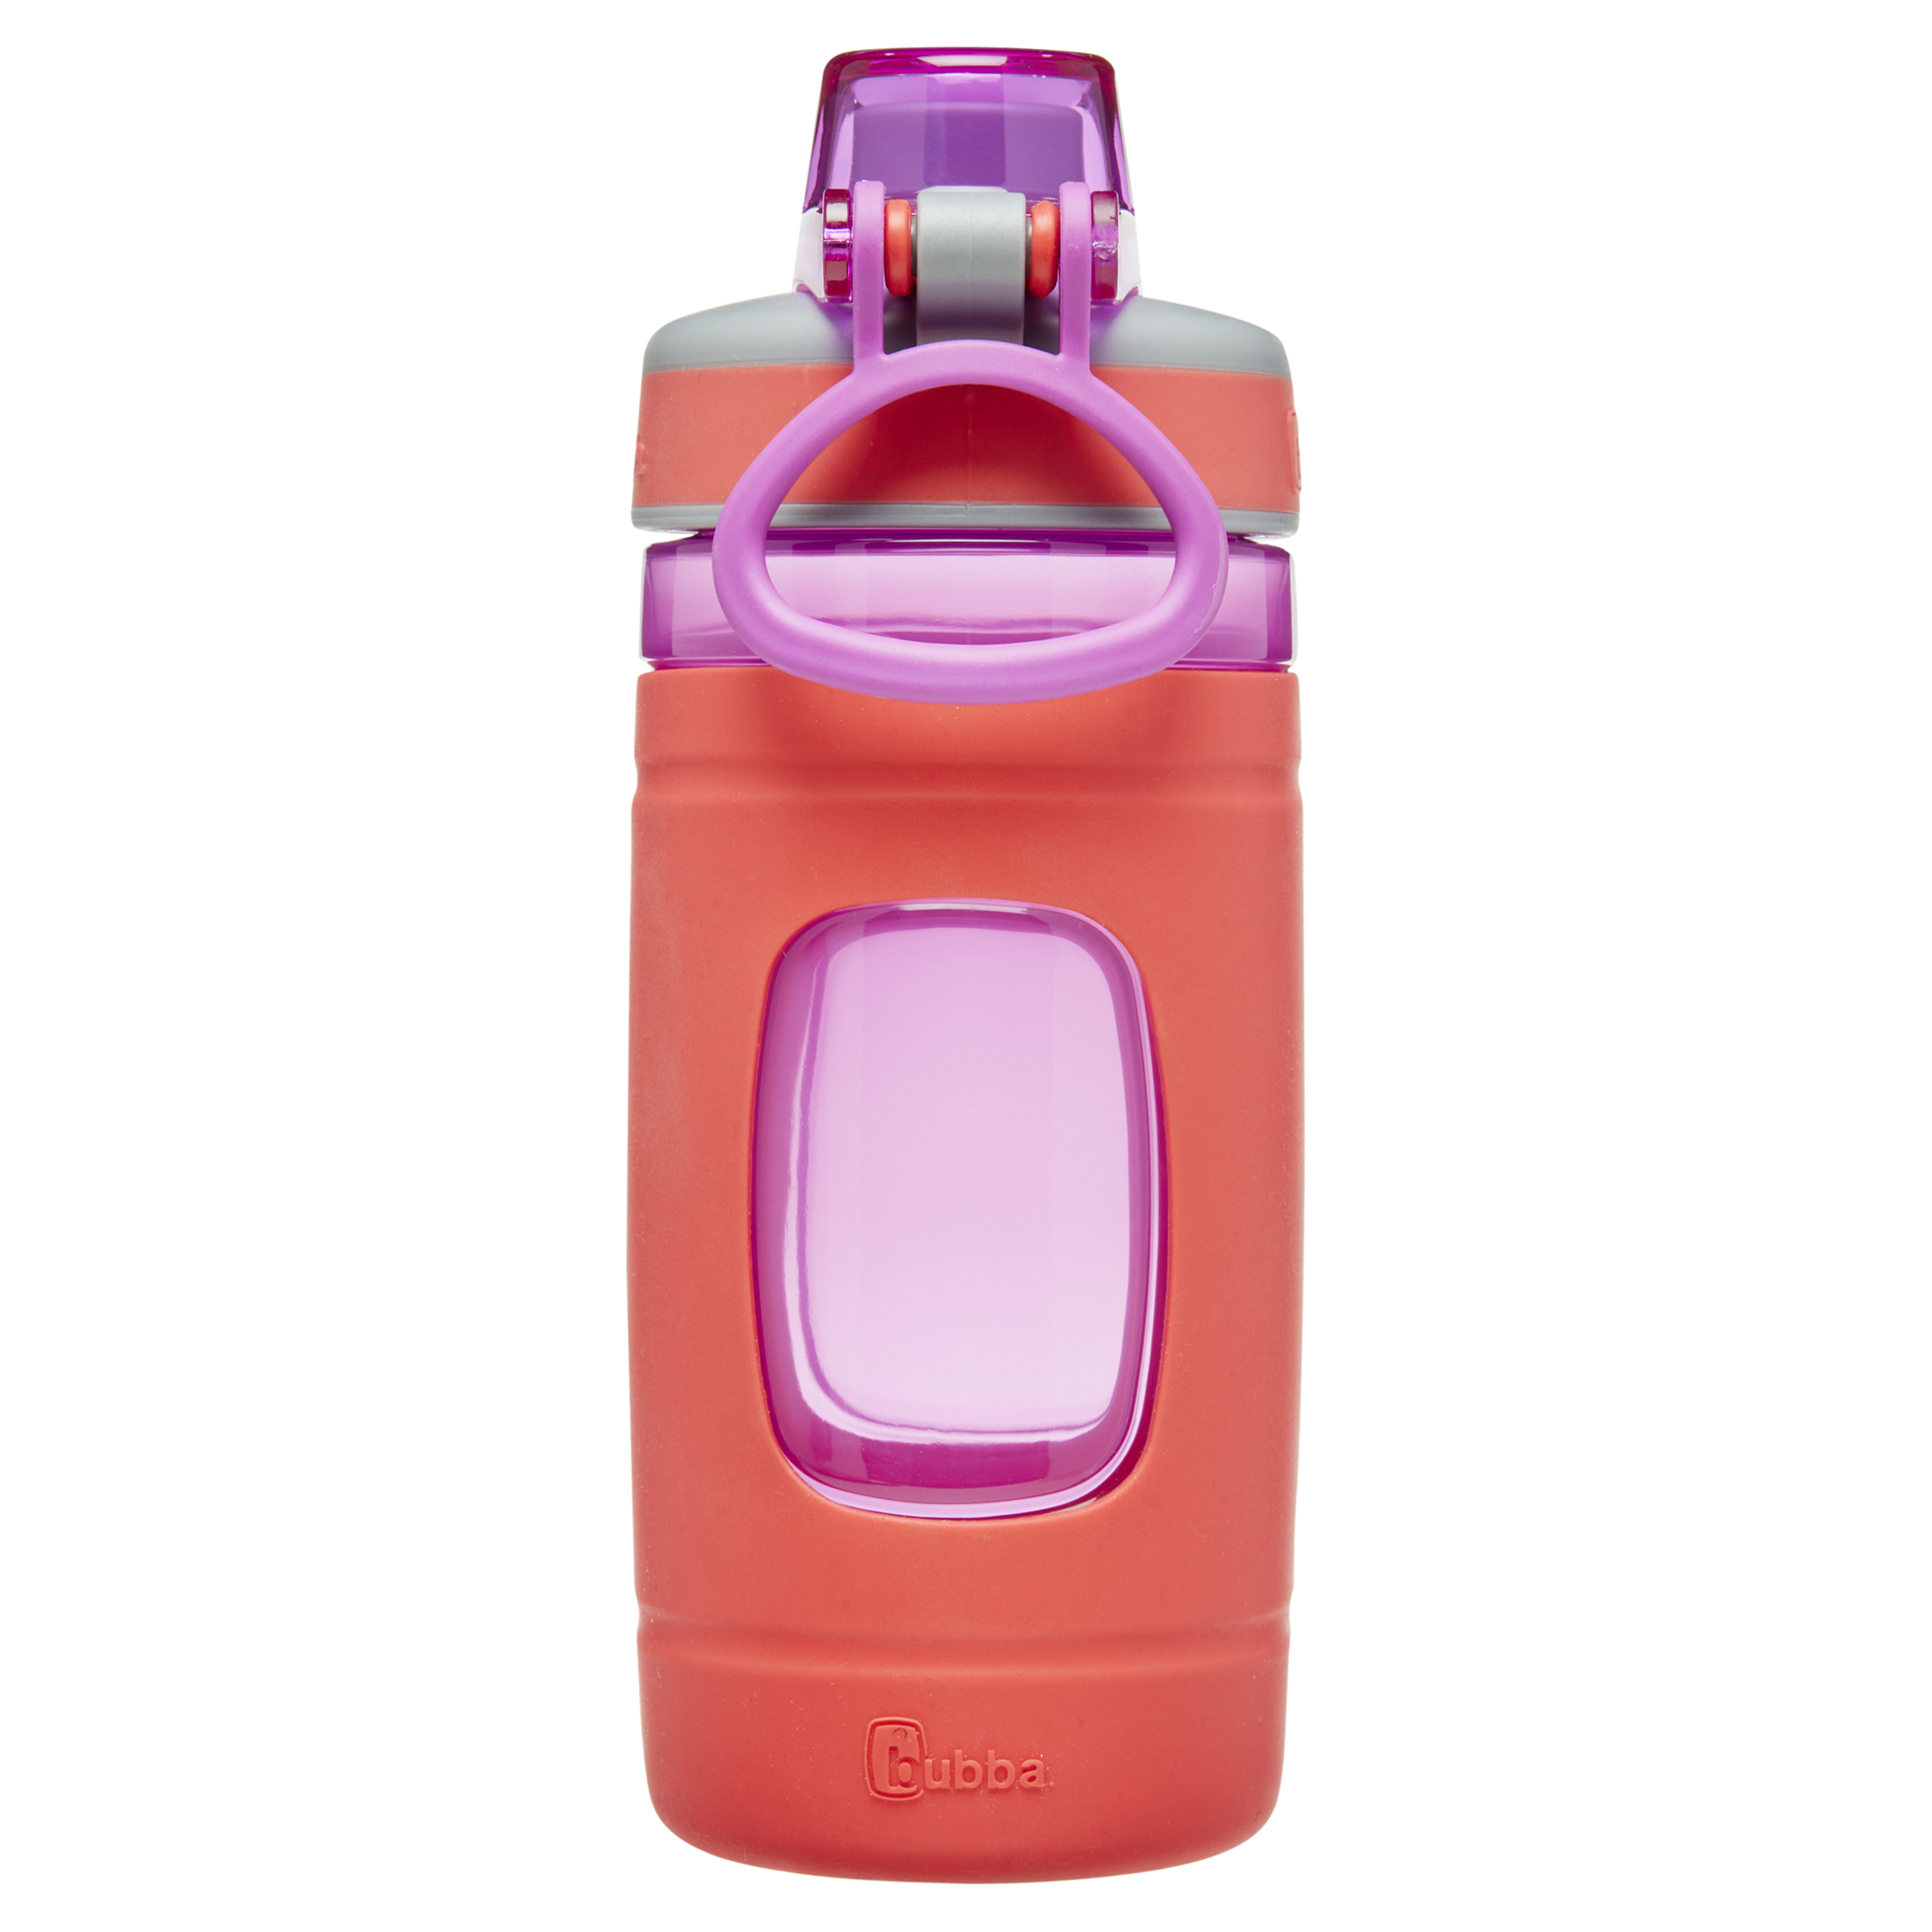 bubba Flo Kids Water Bottle Wide Mouth Lid with Silicone Sleeve Coral, 16 fl oz. - image 2 of 7